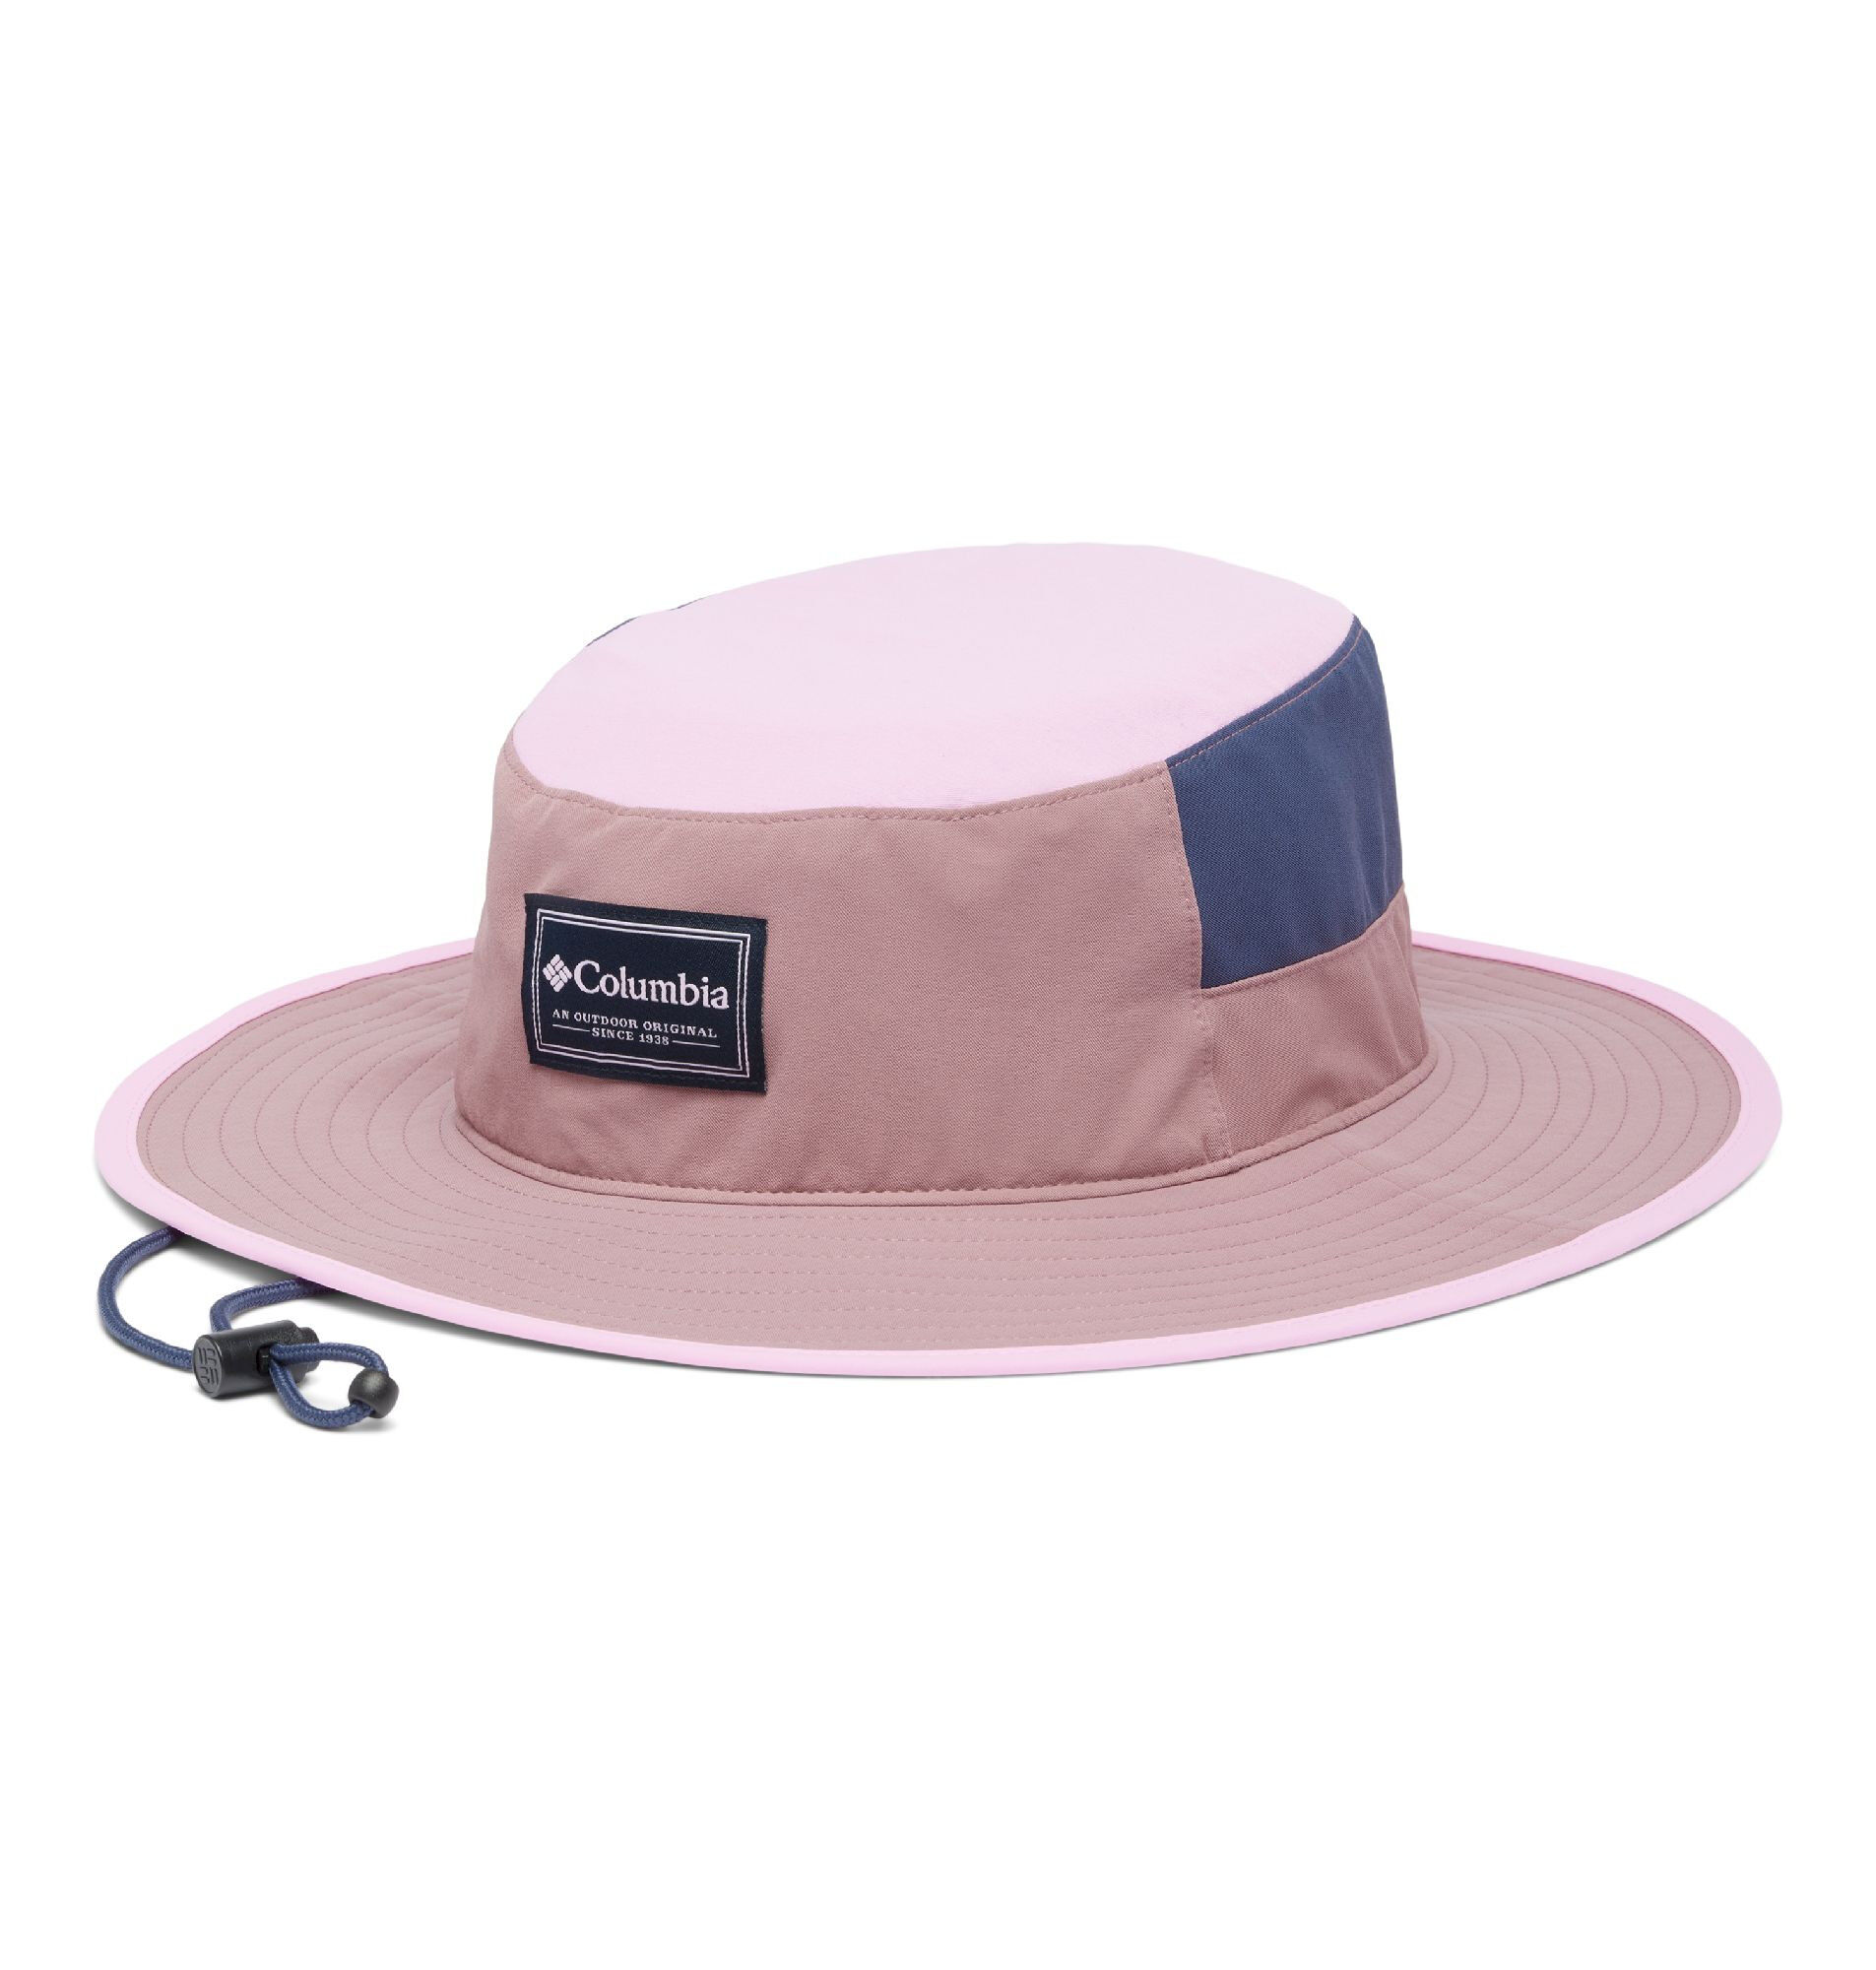 Columbia Broad Spectrum Booney - Hat Fig / Cosmos / Nocturnal S/M